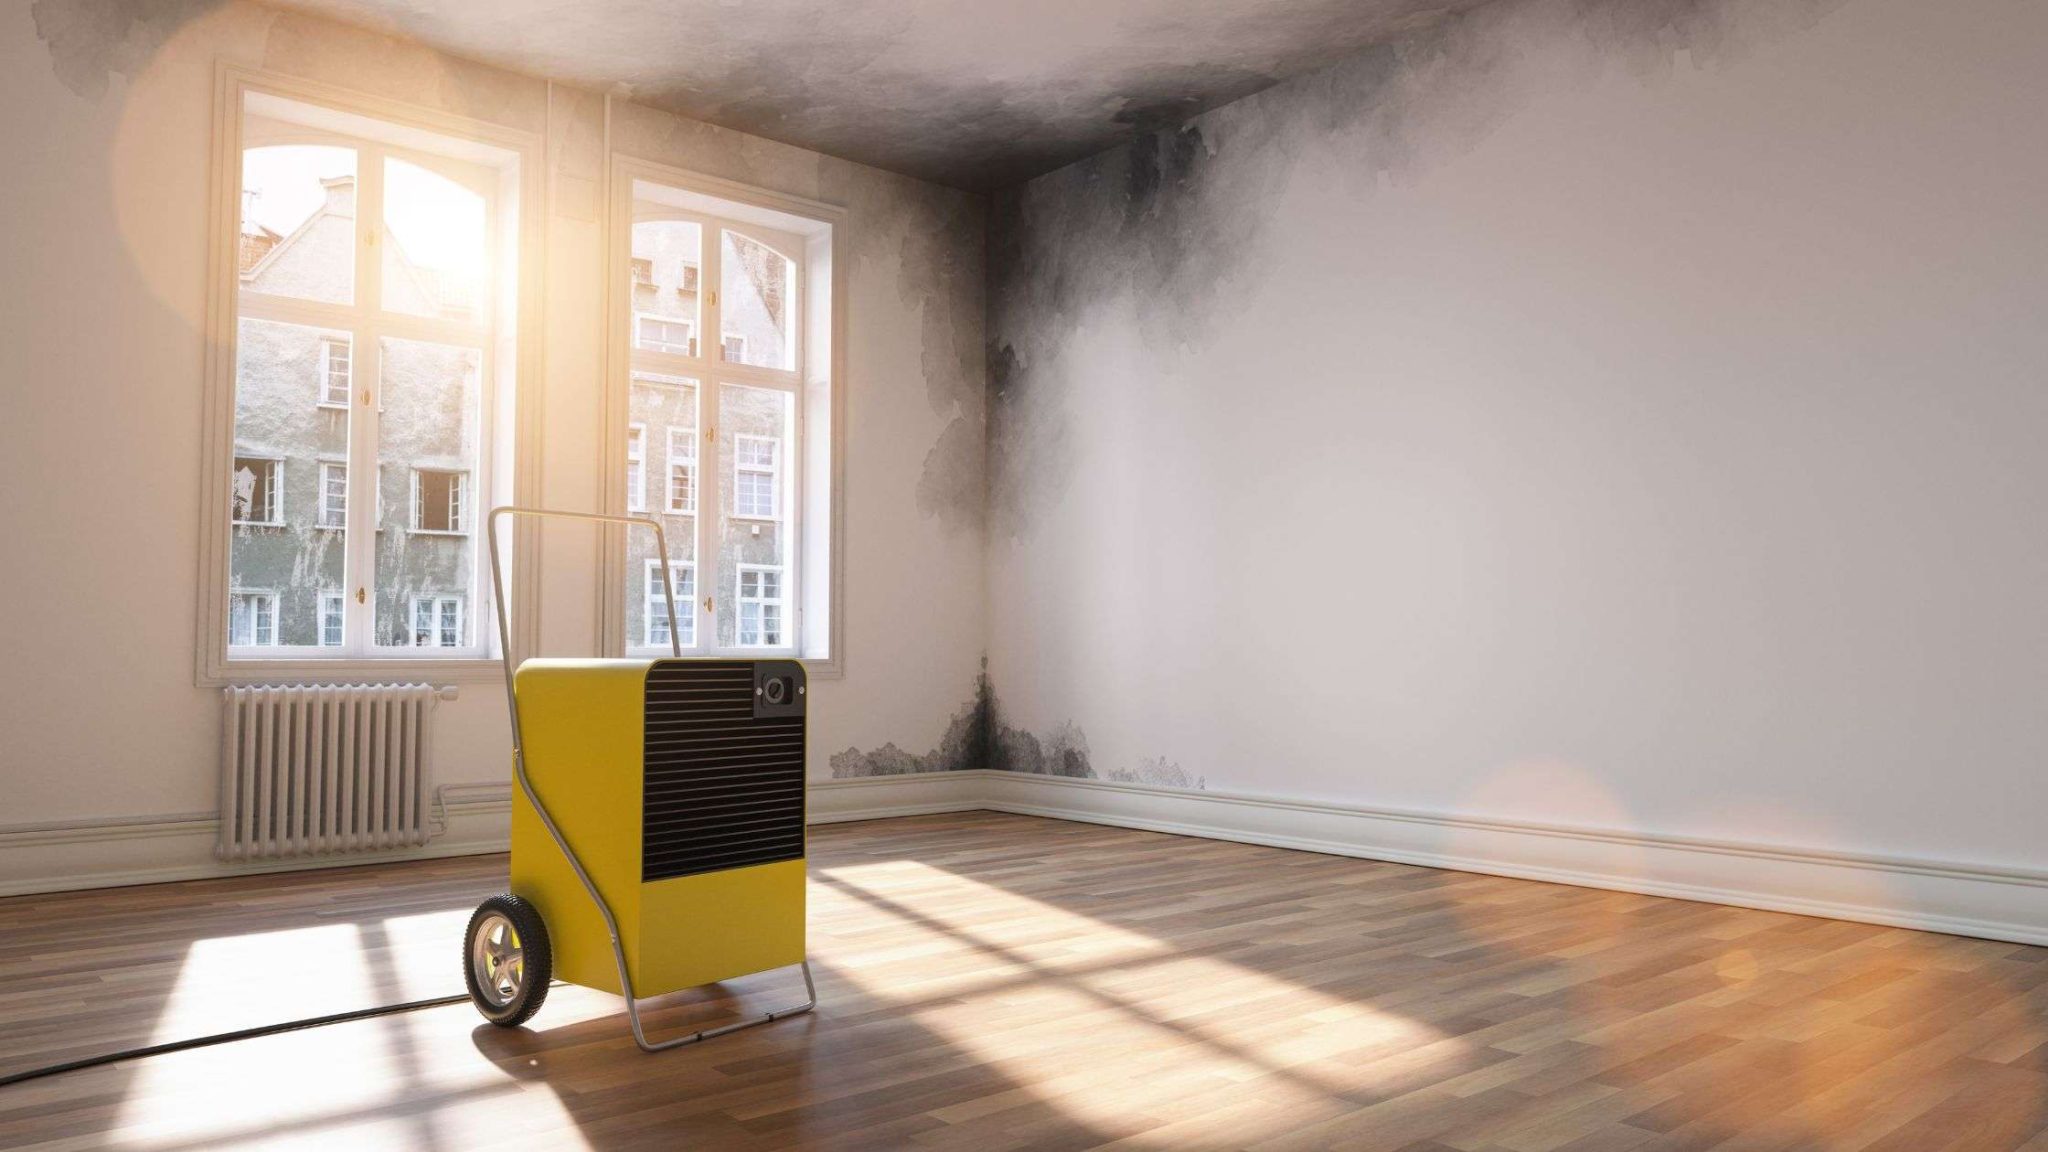 how-to-dispose-of-a-dehumidifier-properly-jiffyjunk